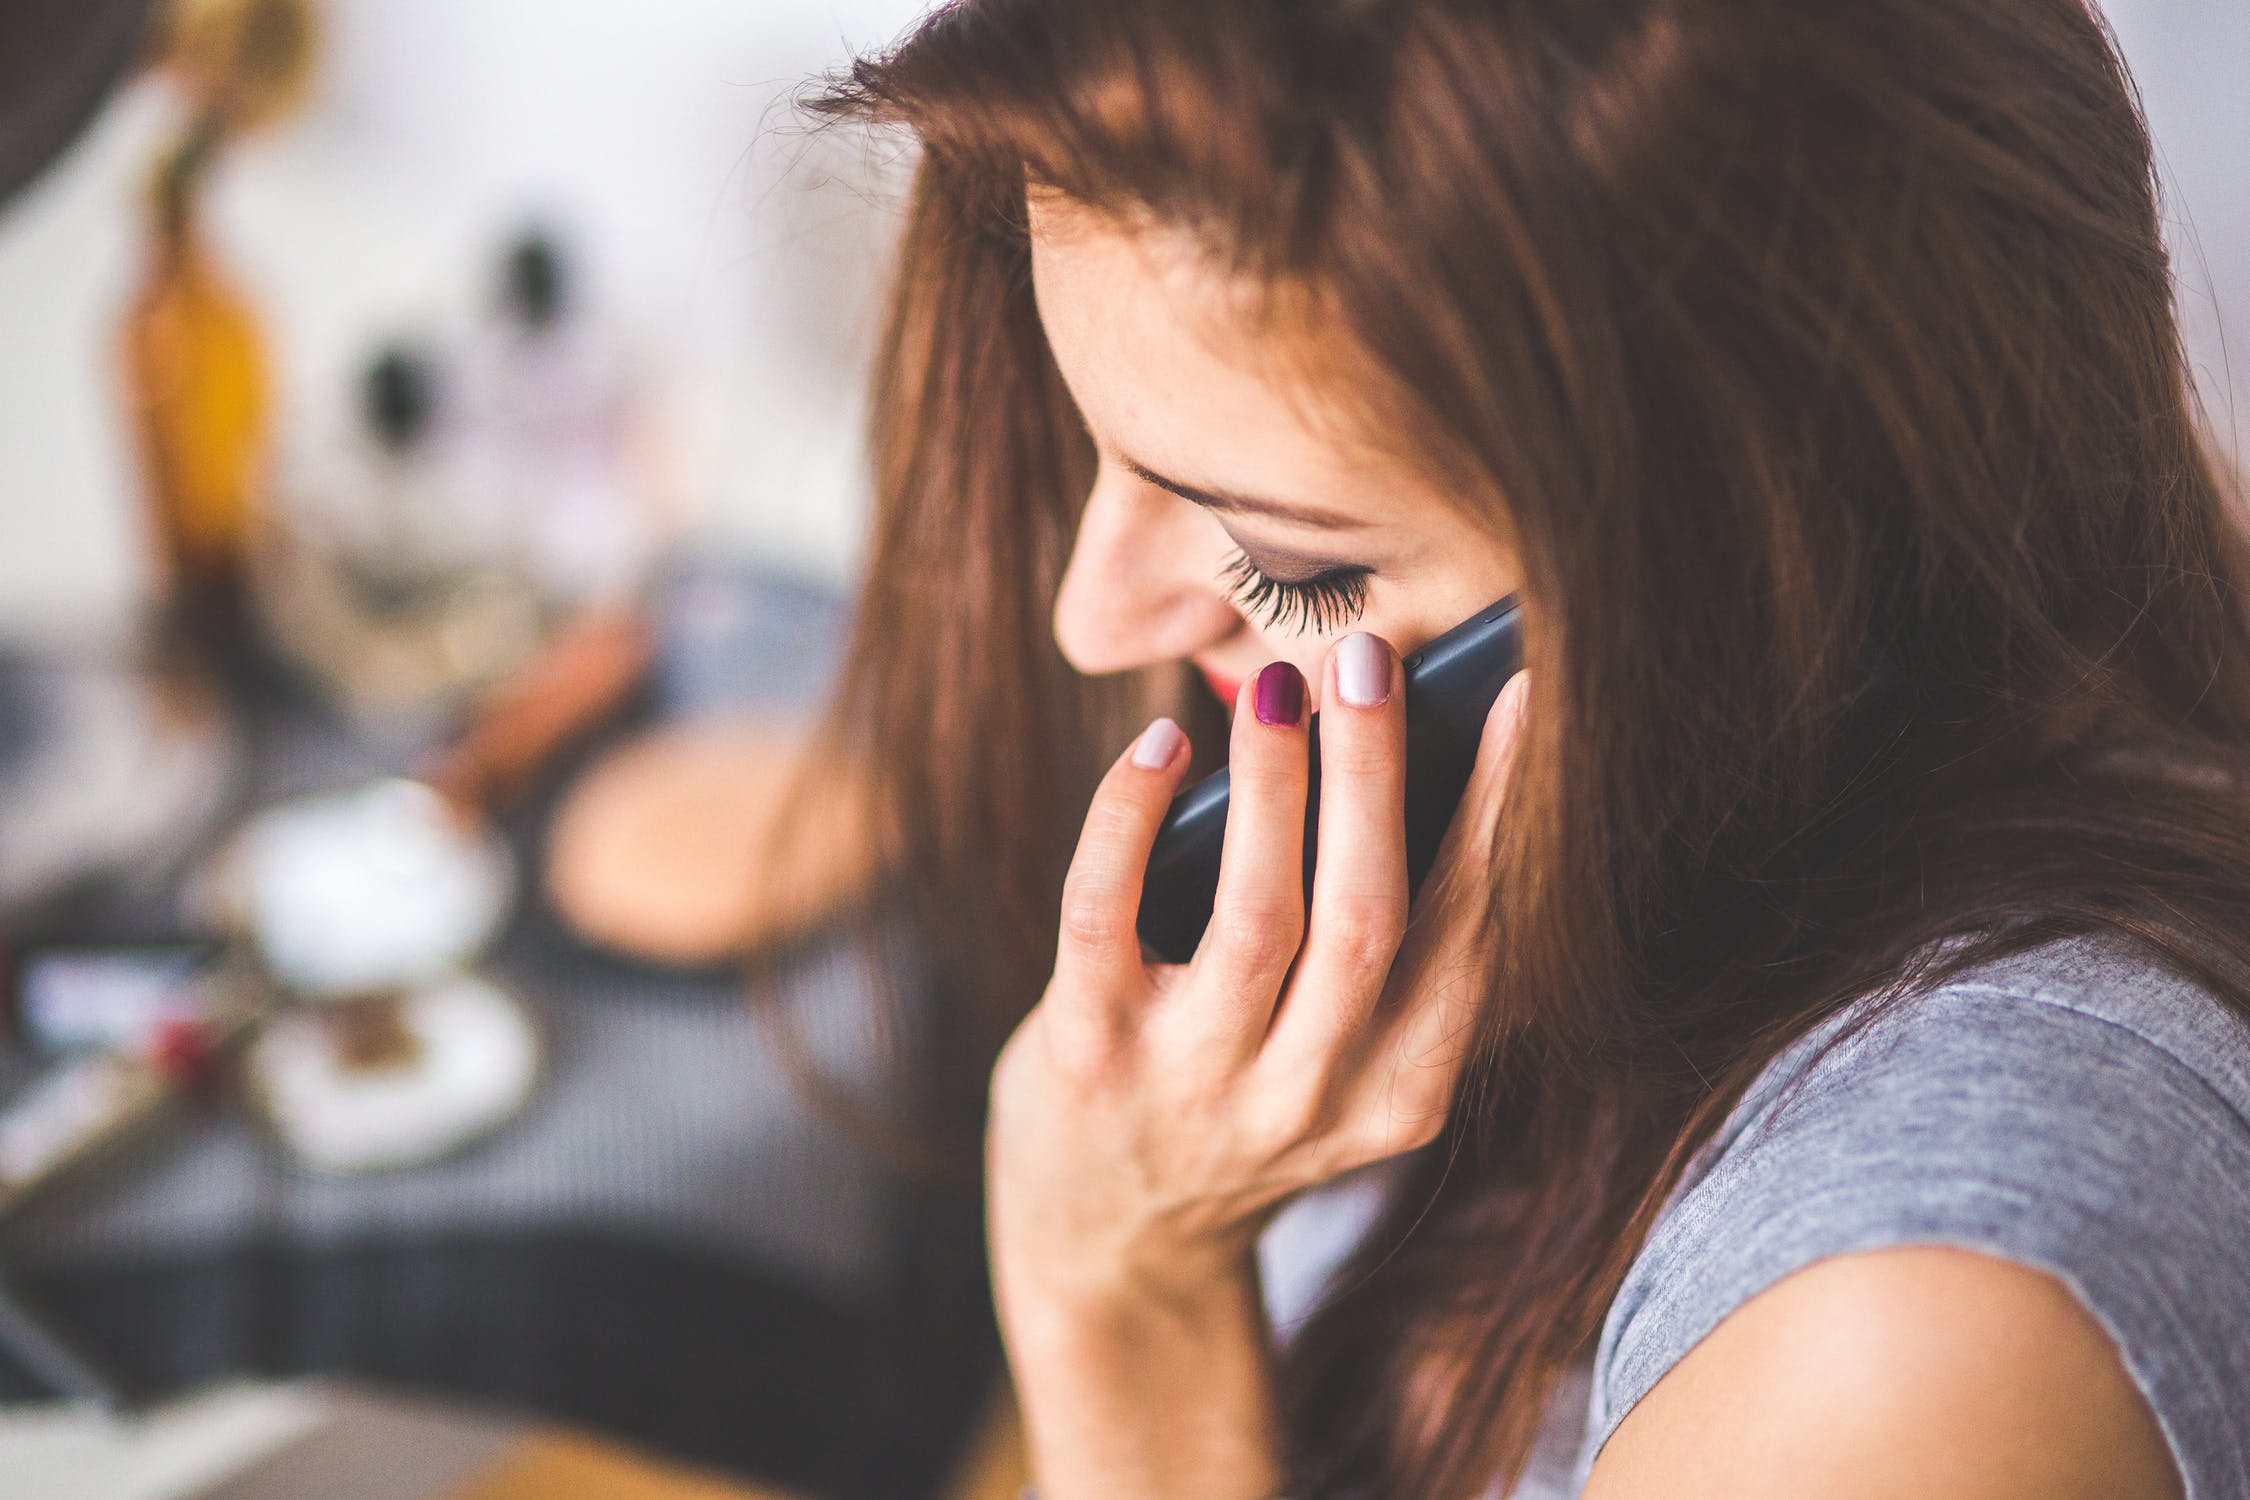 Woman on the phone: Source: Pexels